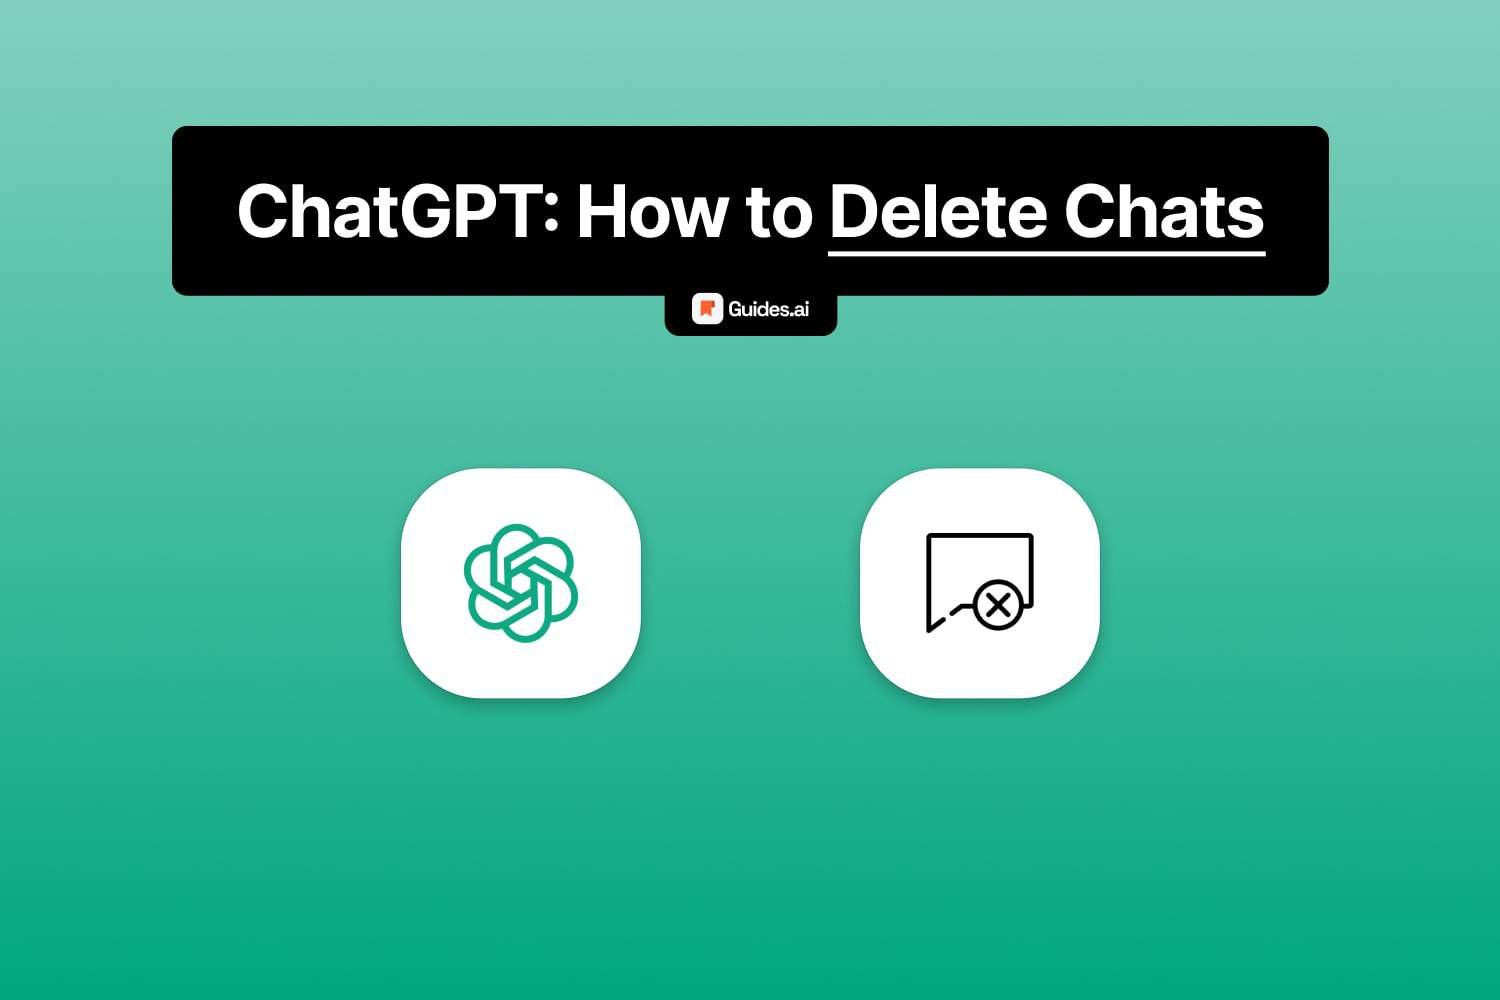 How to delete conversations in ChatGPT